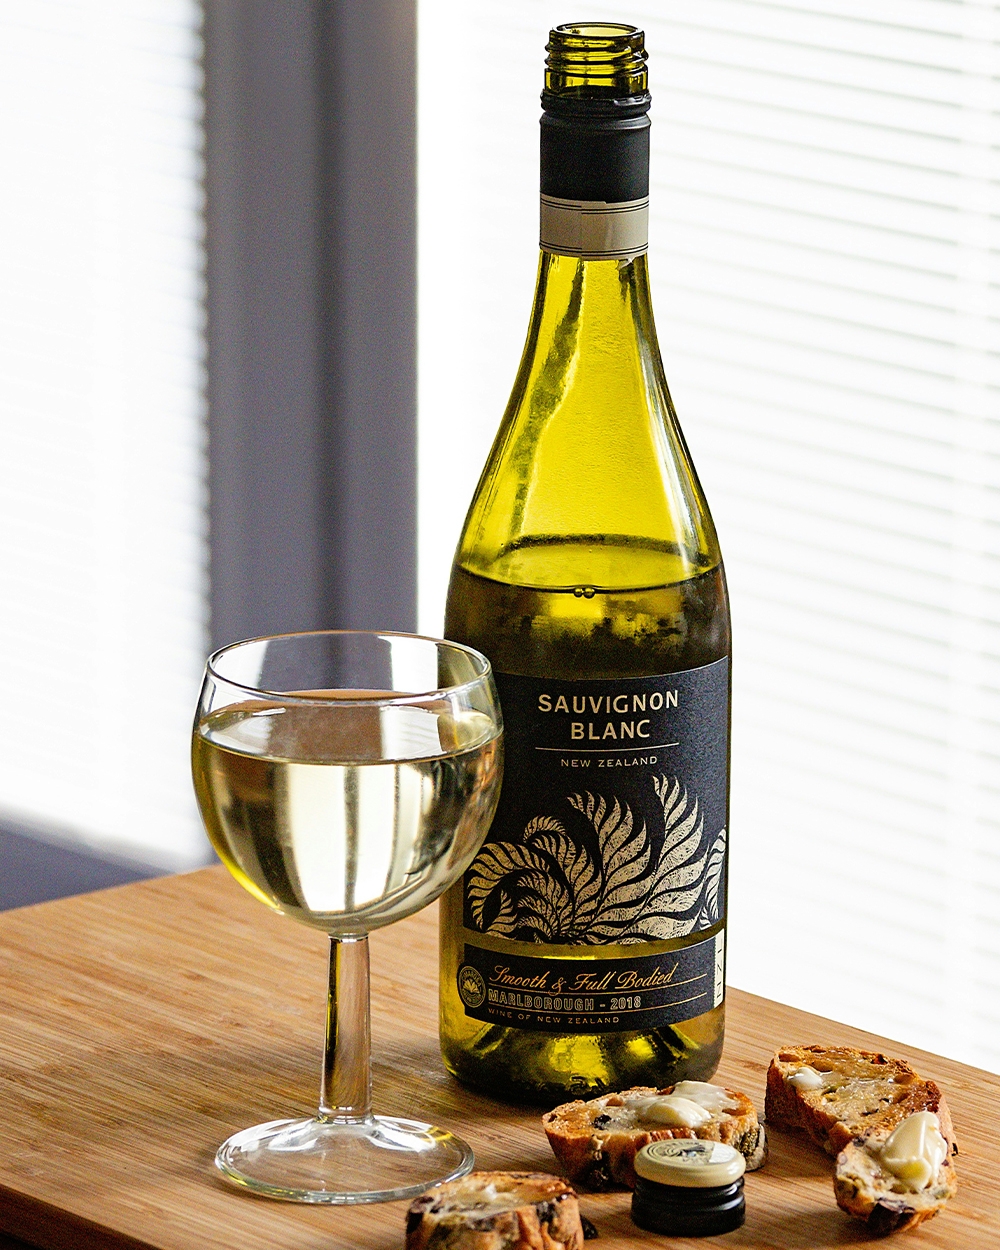 Open bottle of Sauvignon Blanc, full glass of wine, small buttered bread bites on a wooden table.